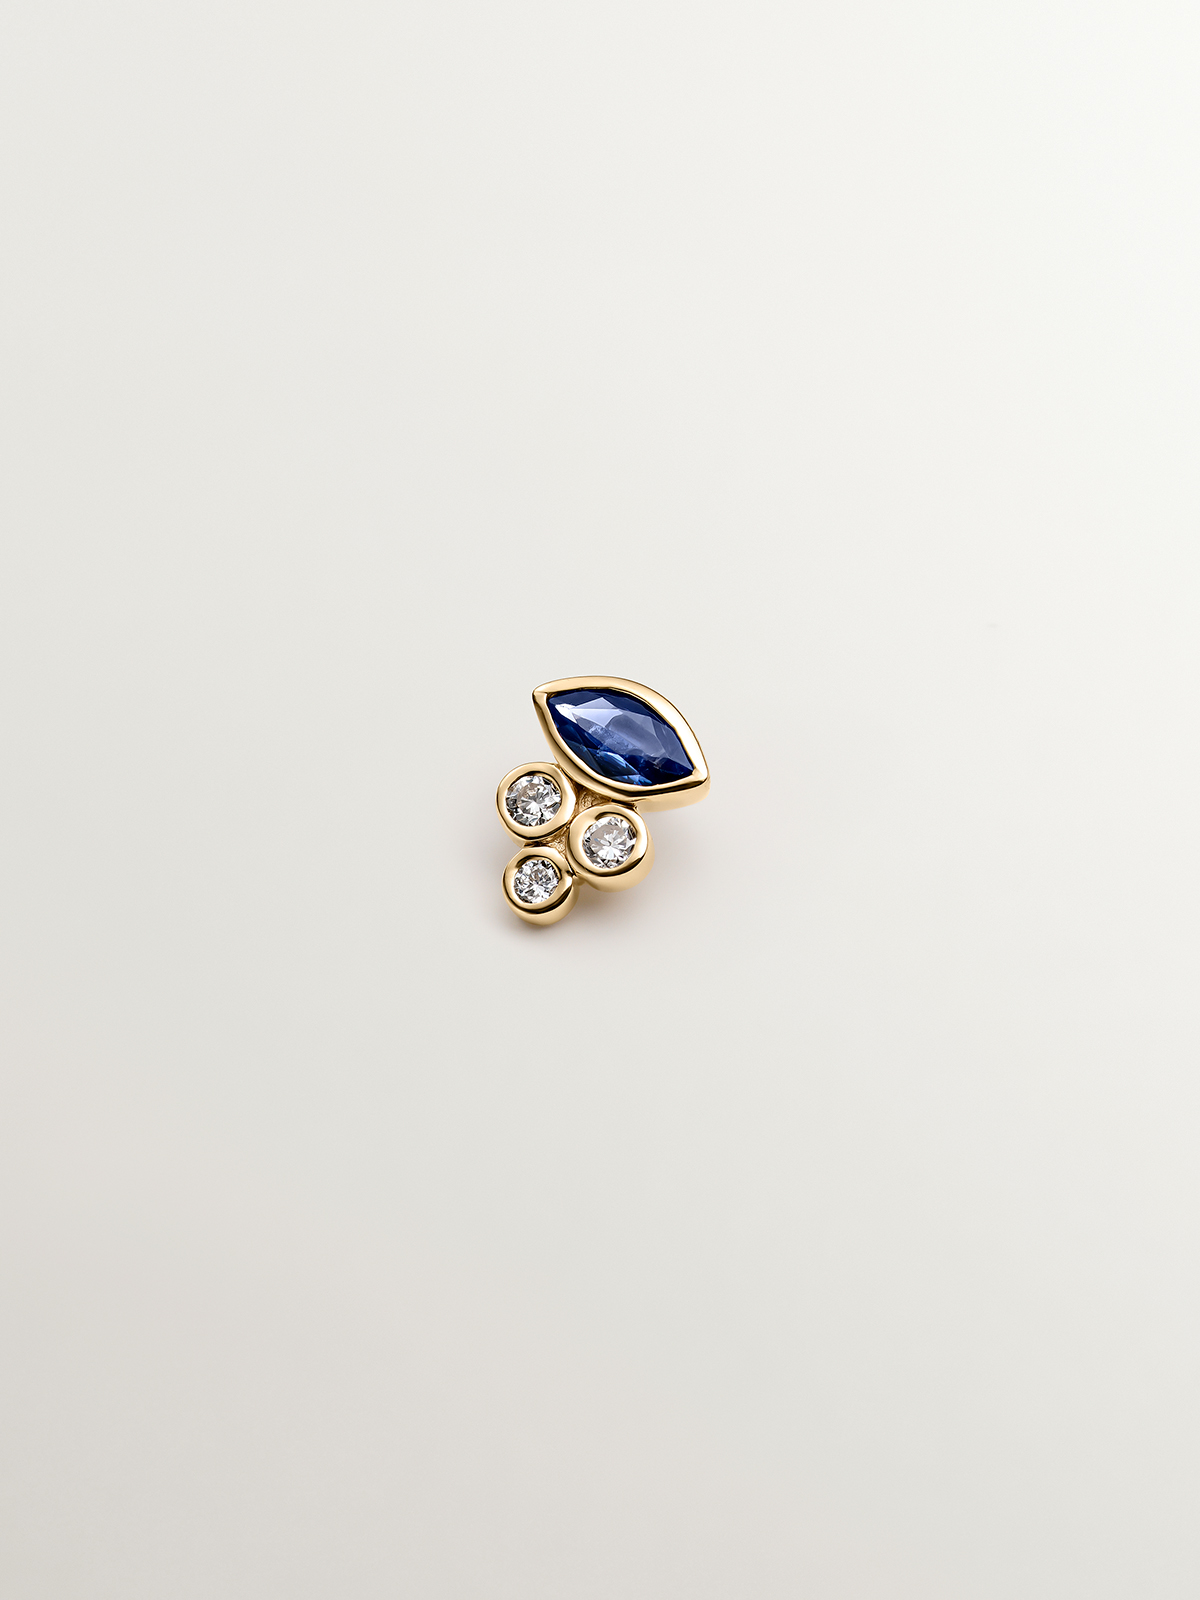 Individual 9K yellow gold earring with blue sapphire and diamonds.